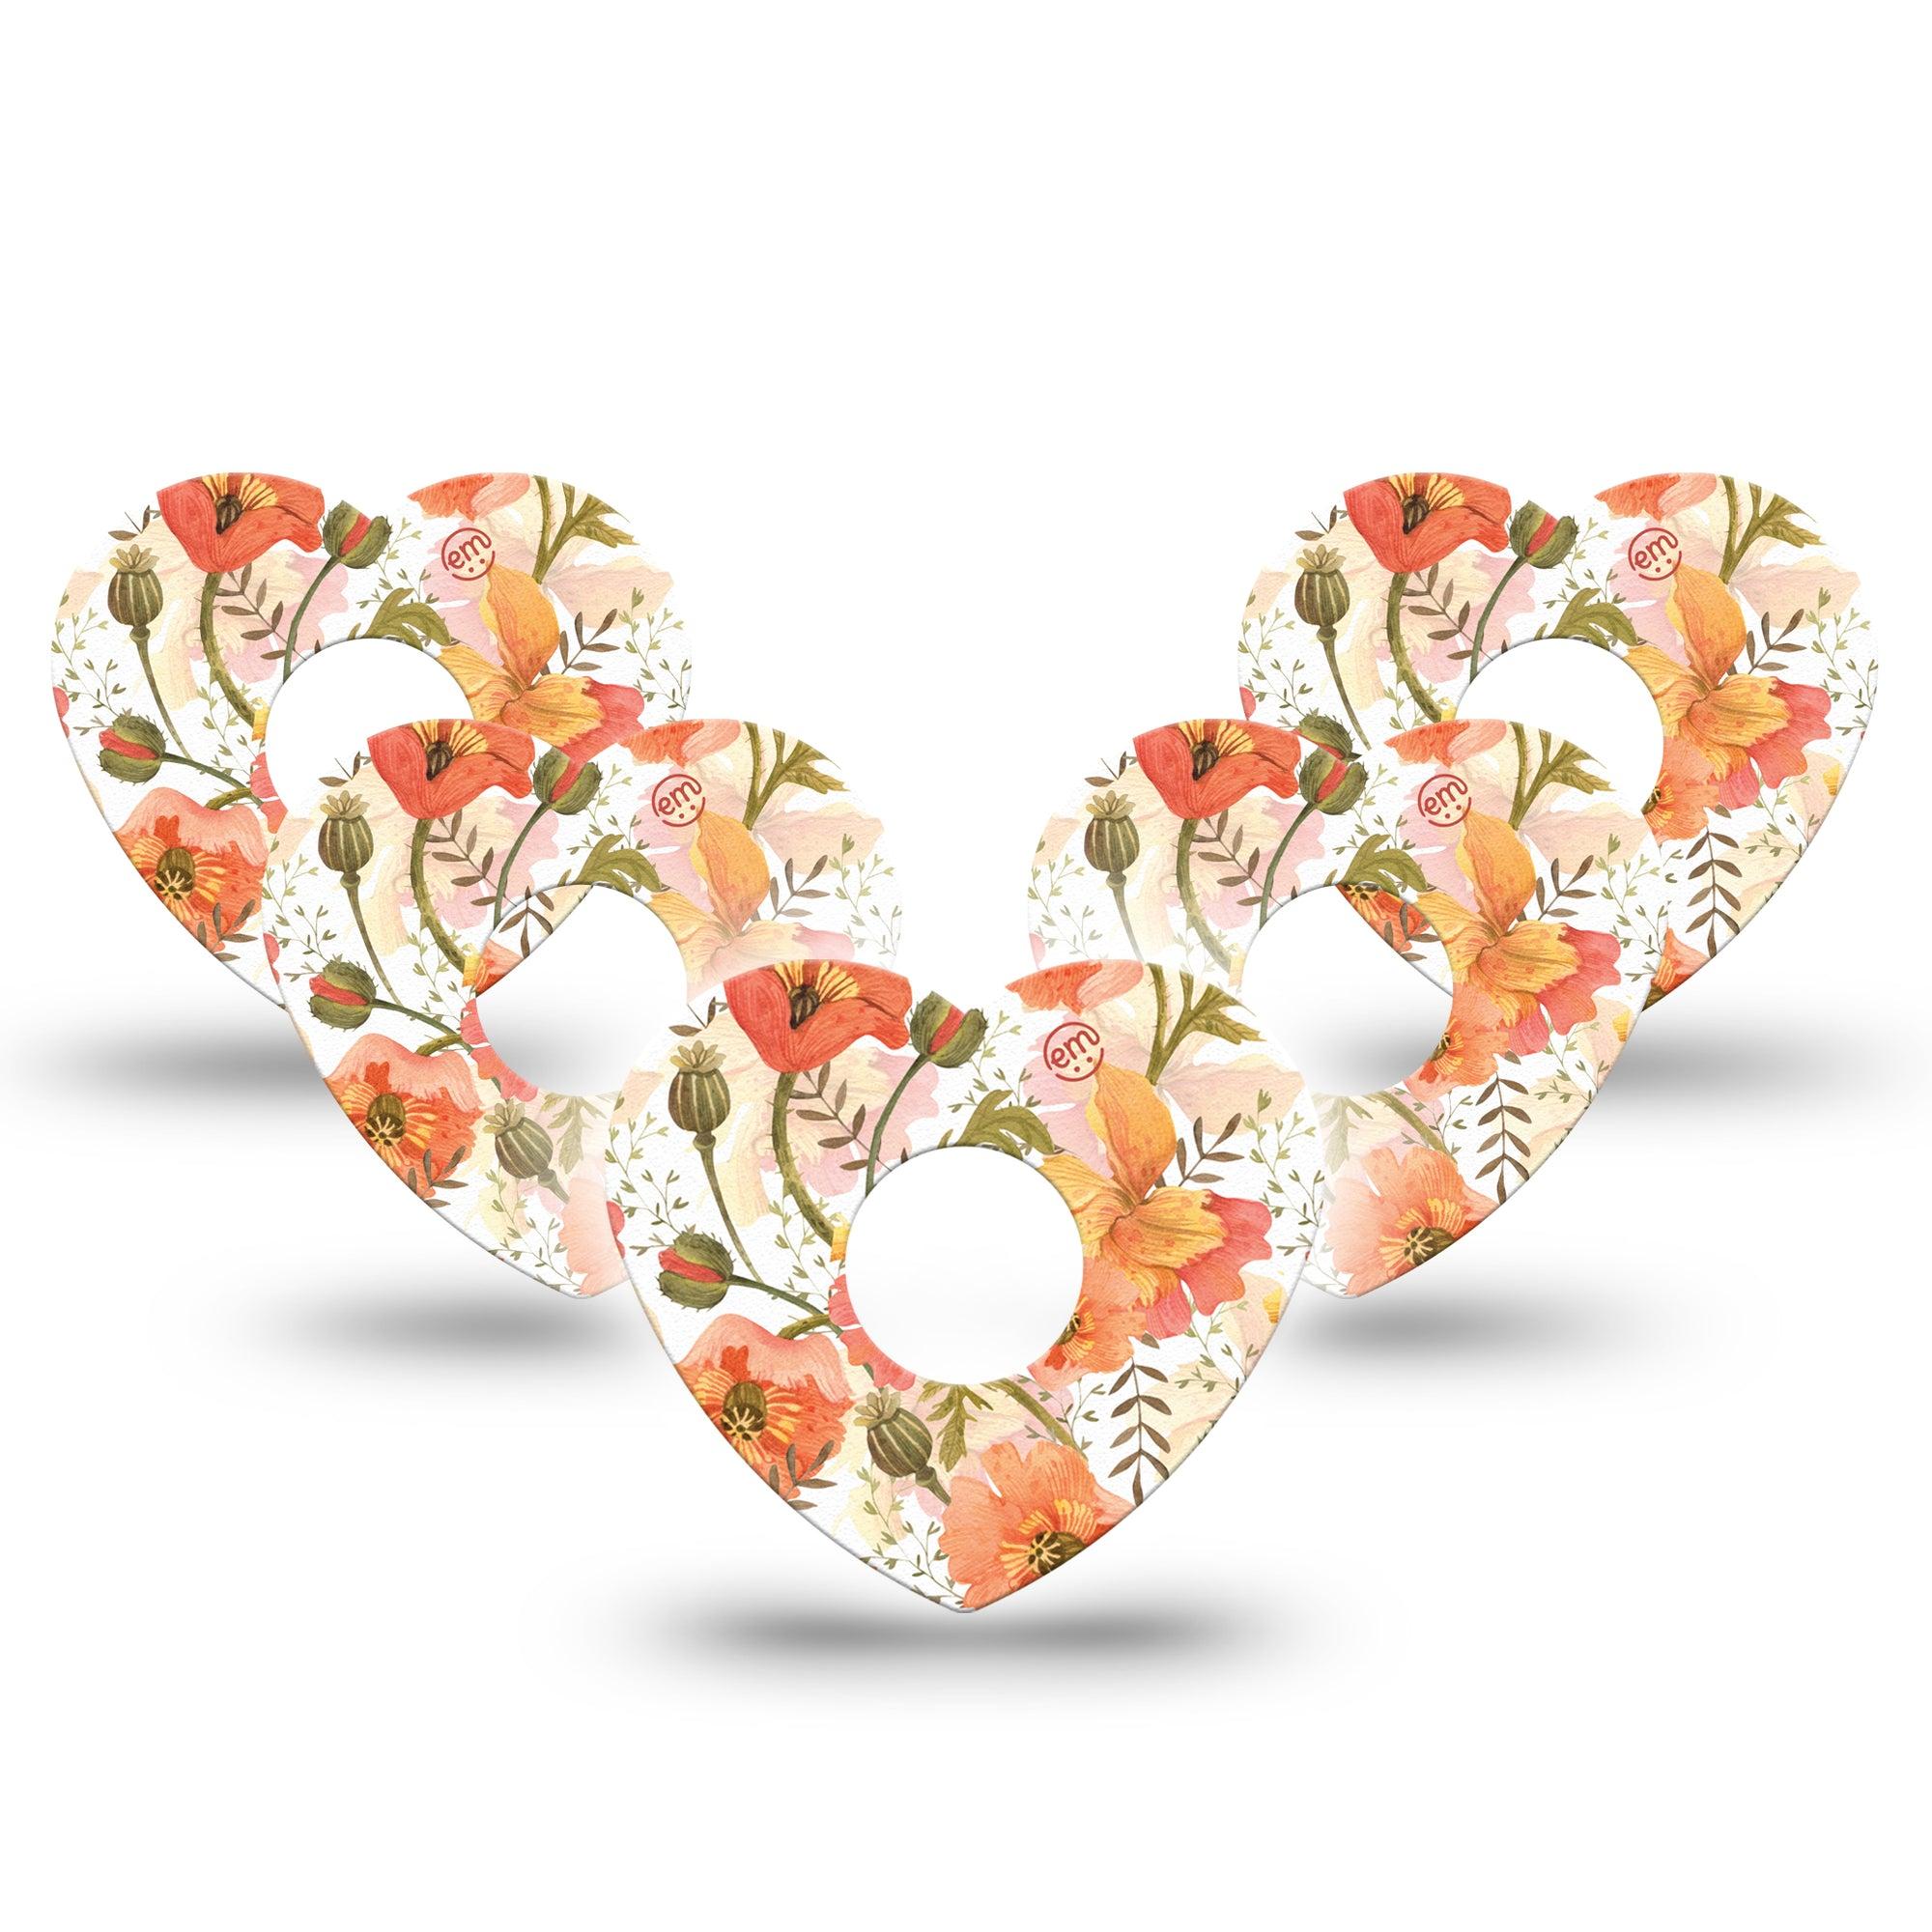 ExpressionMed Peachy Blooms Heart Libre 3 Tape, 5-Pack, Orange Florals Themed, CGM Adhesive Patch Design